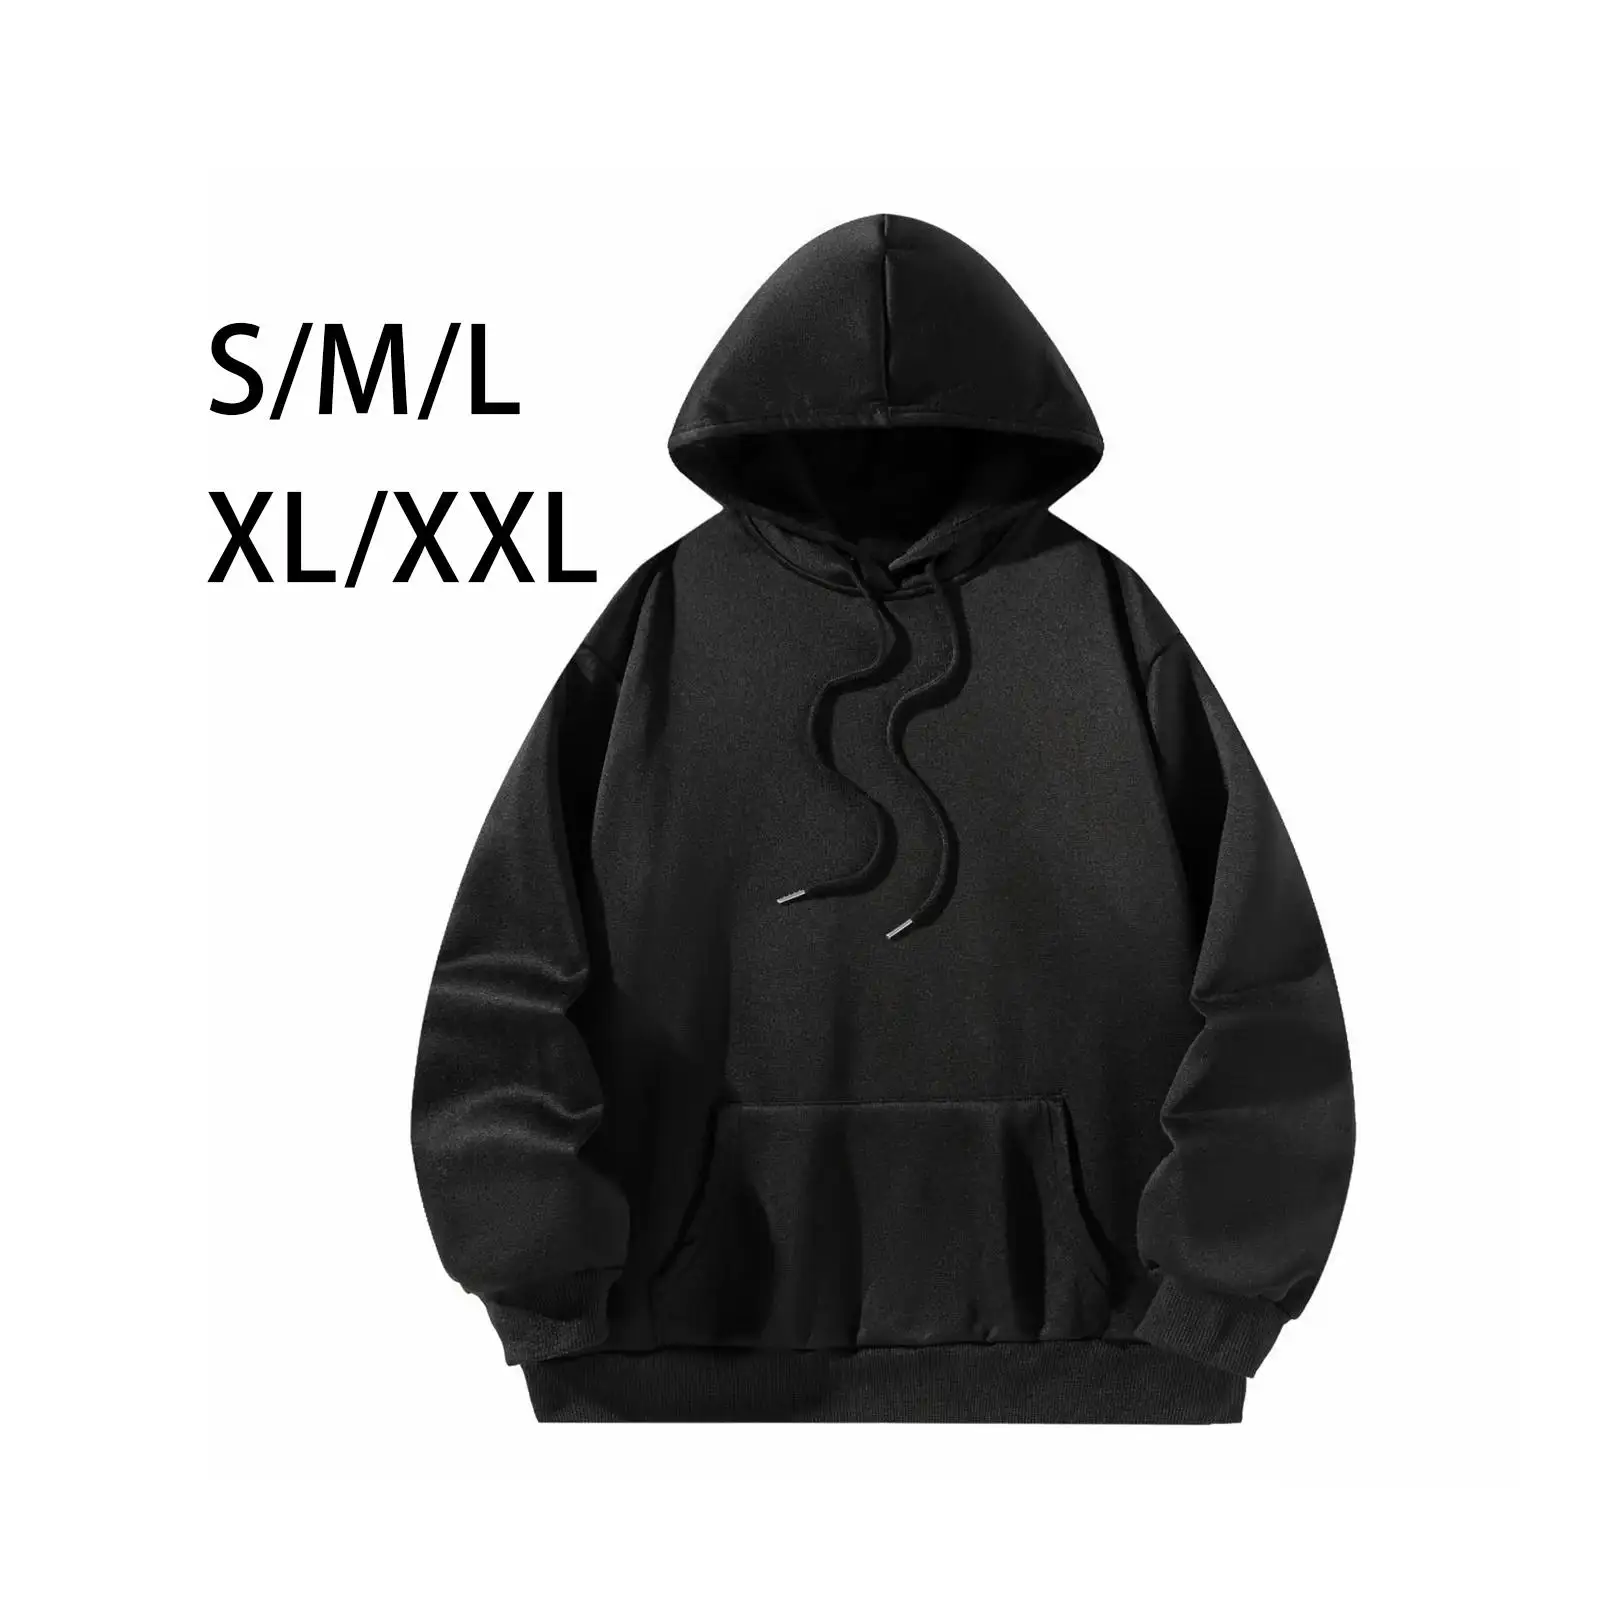 Women`s Pullover Hoodie Fashion Clothes Graphic Loose Fit Hooded Sweatshirt for Going Out Shopping Female Teen Girls Daily Wear